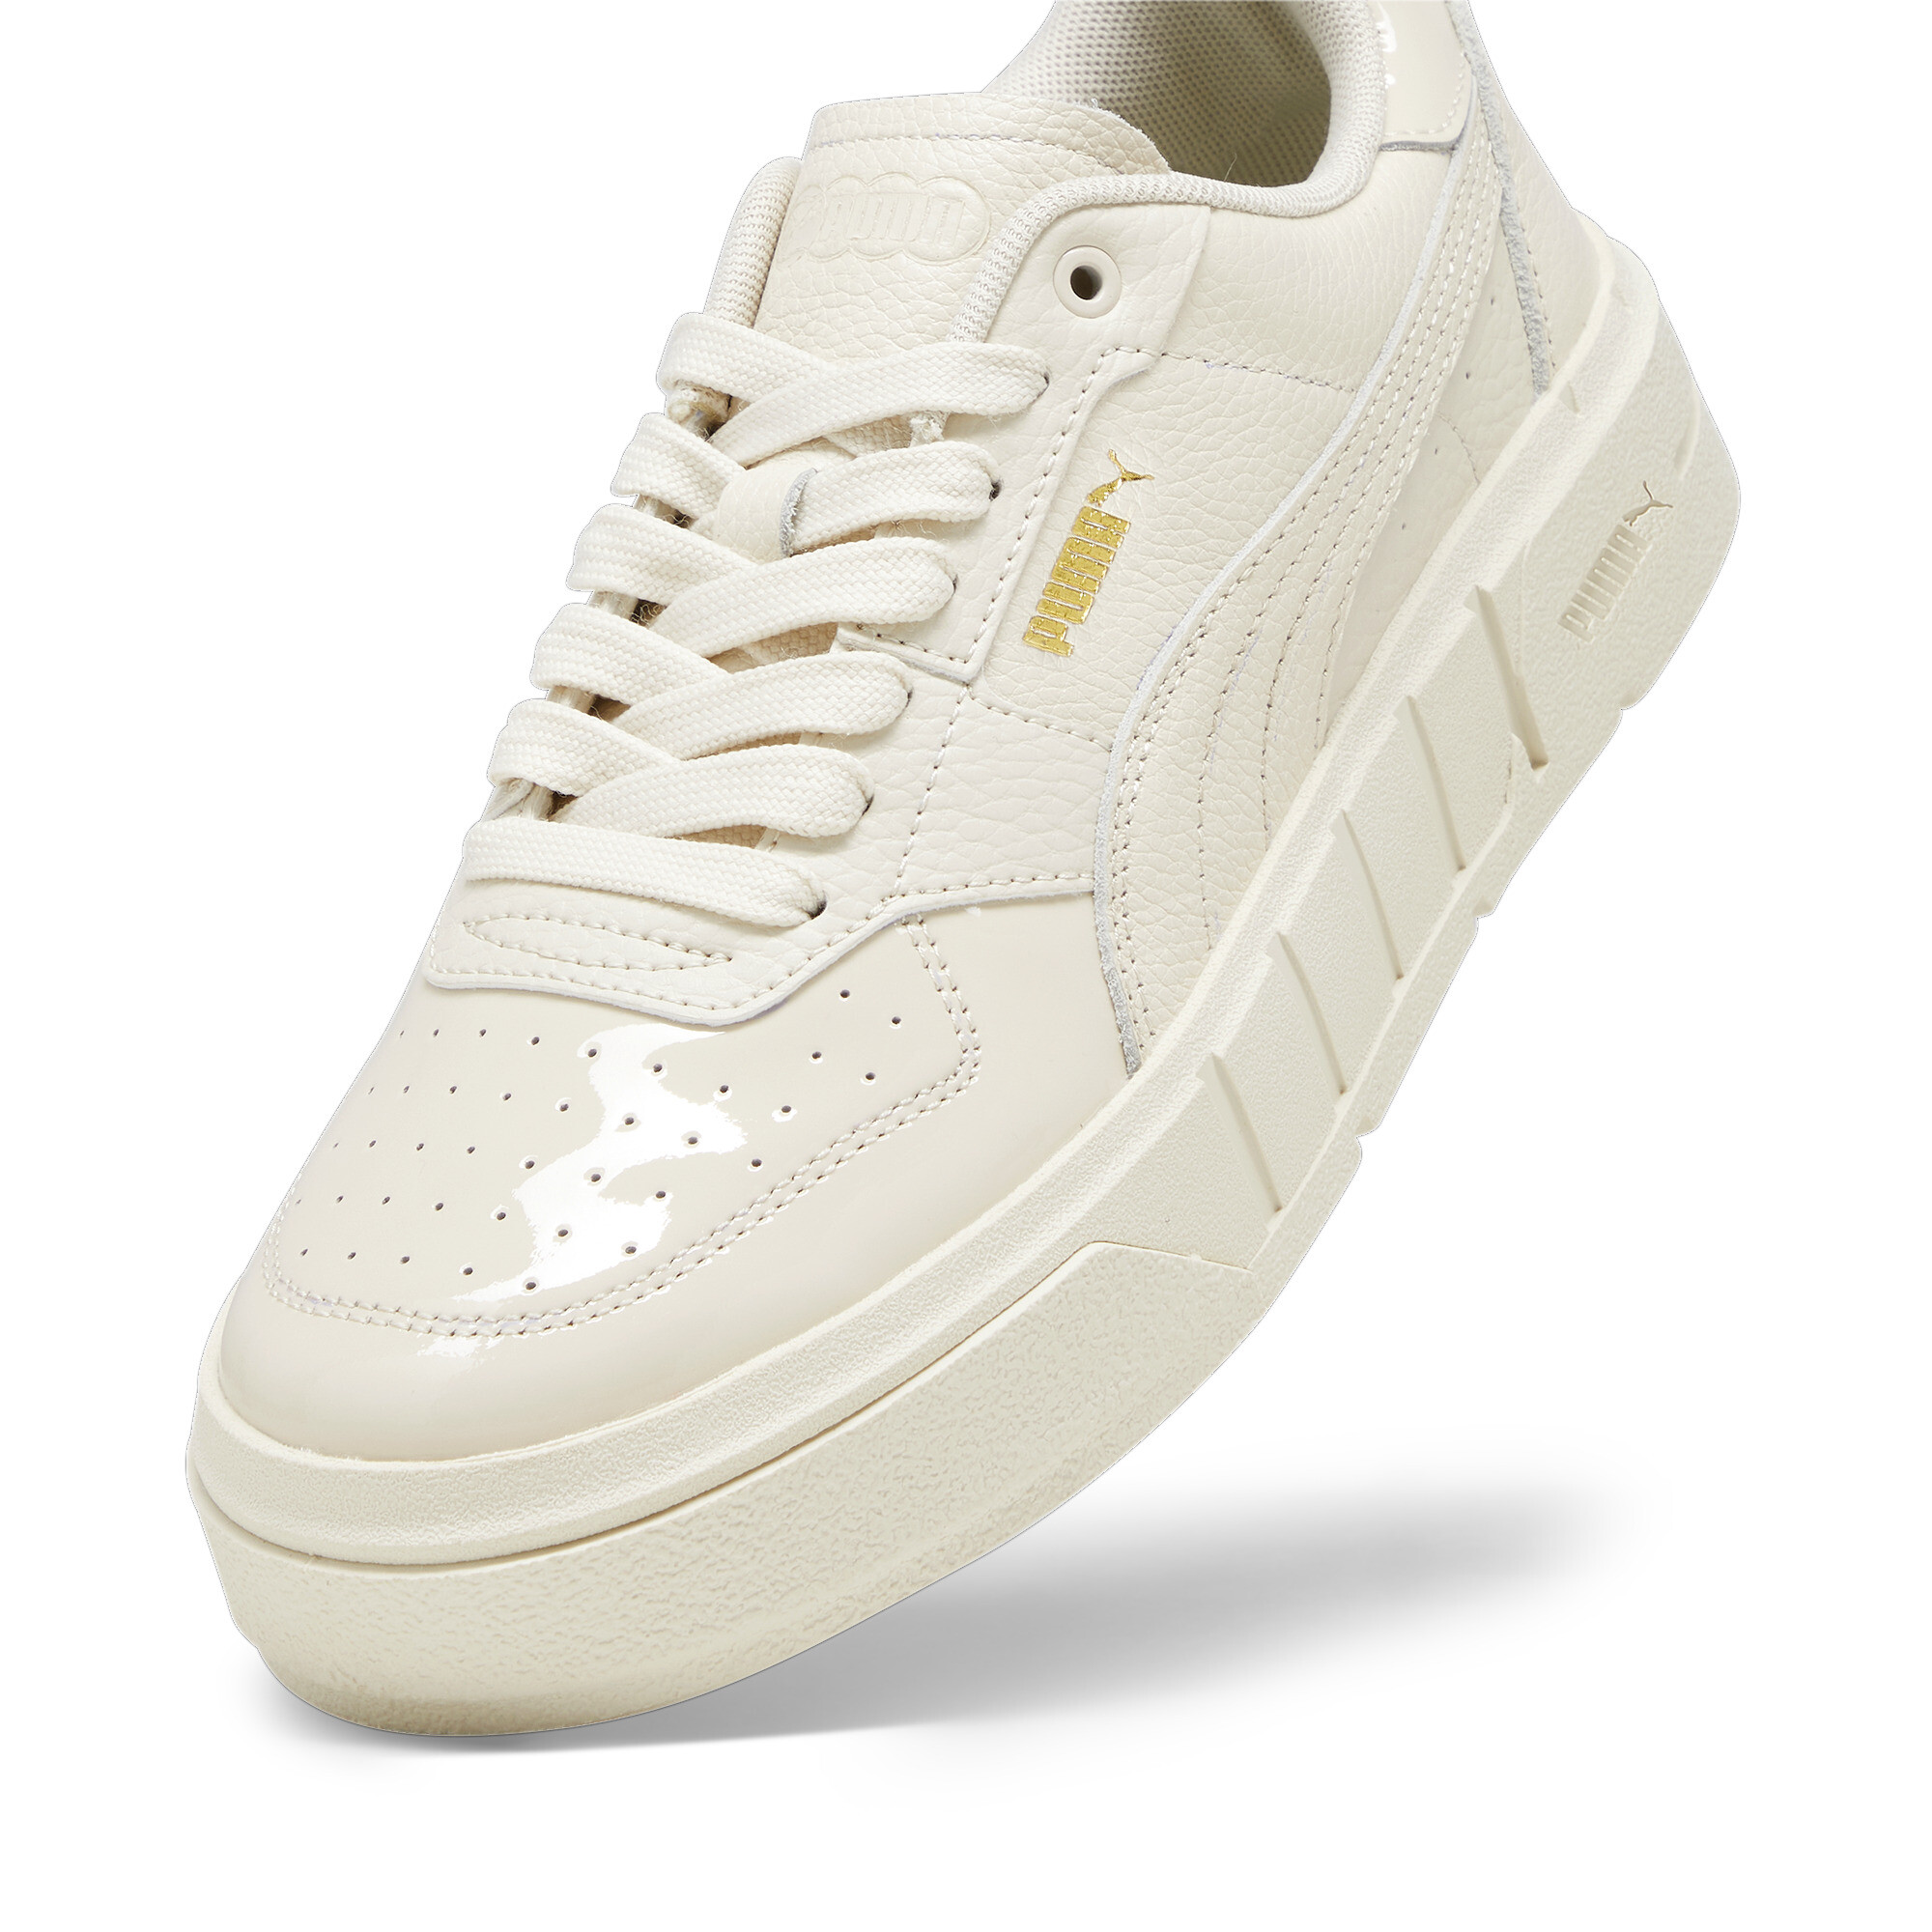 Women's Puma Cali Court Patent's Sneakers, White, Size 37.5, Shoes